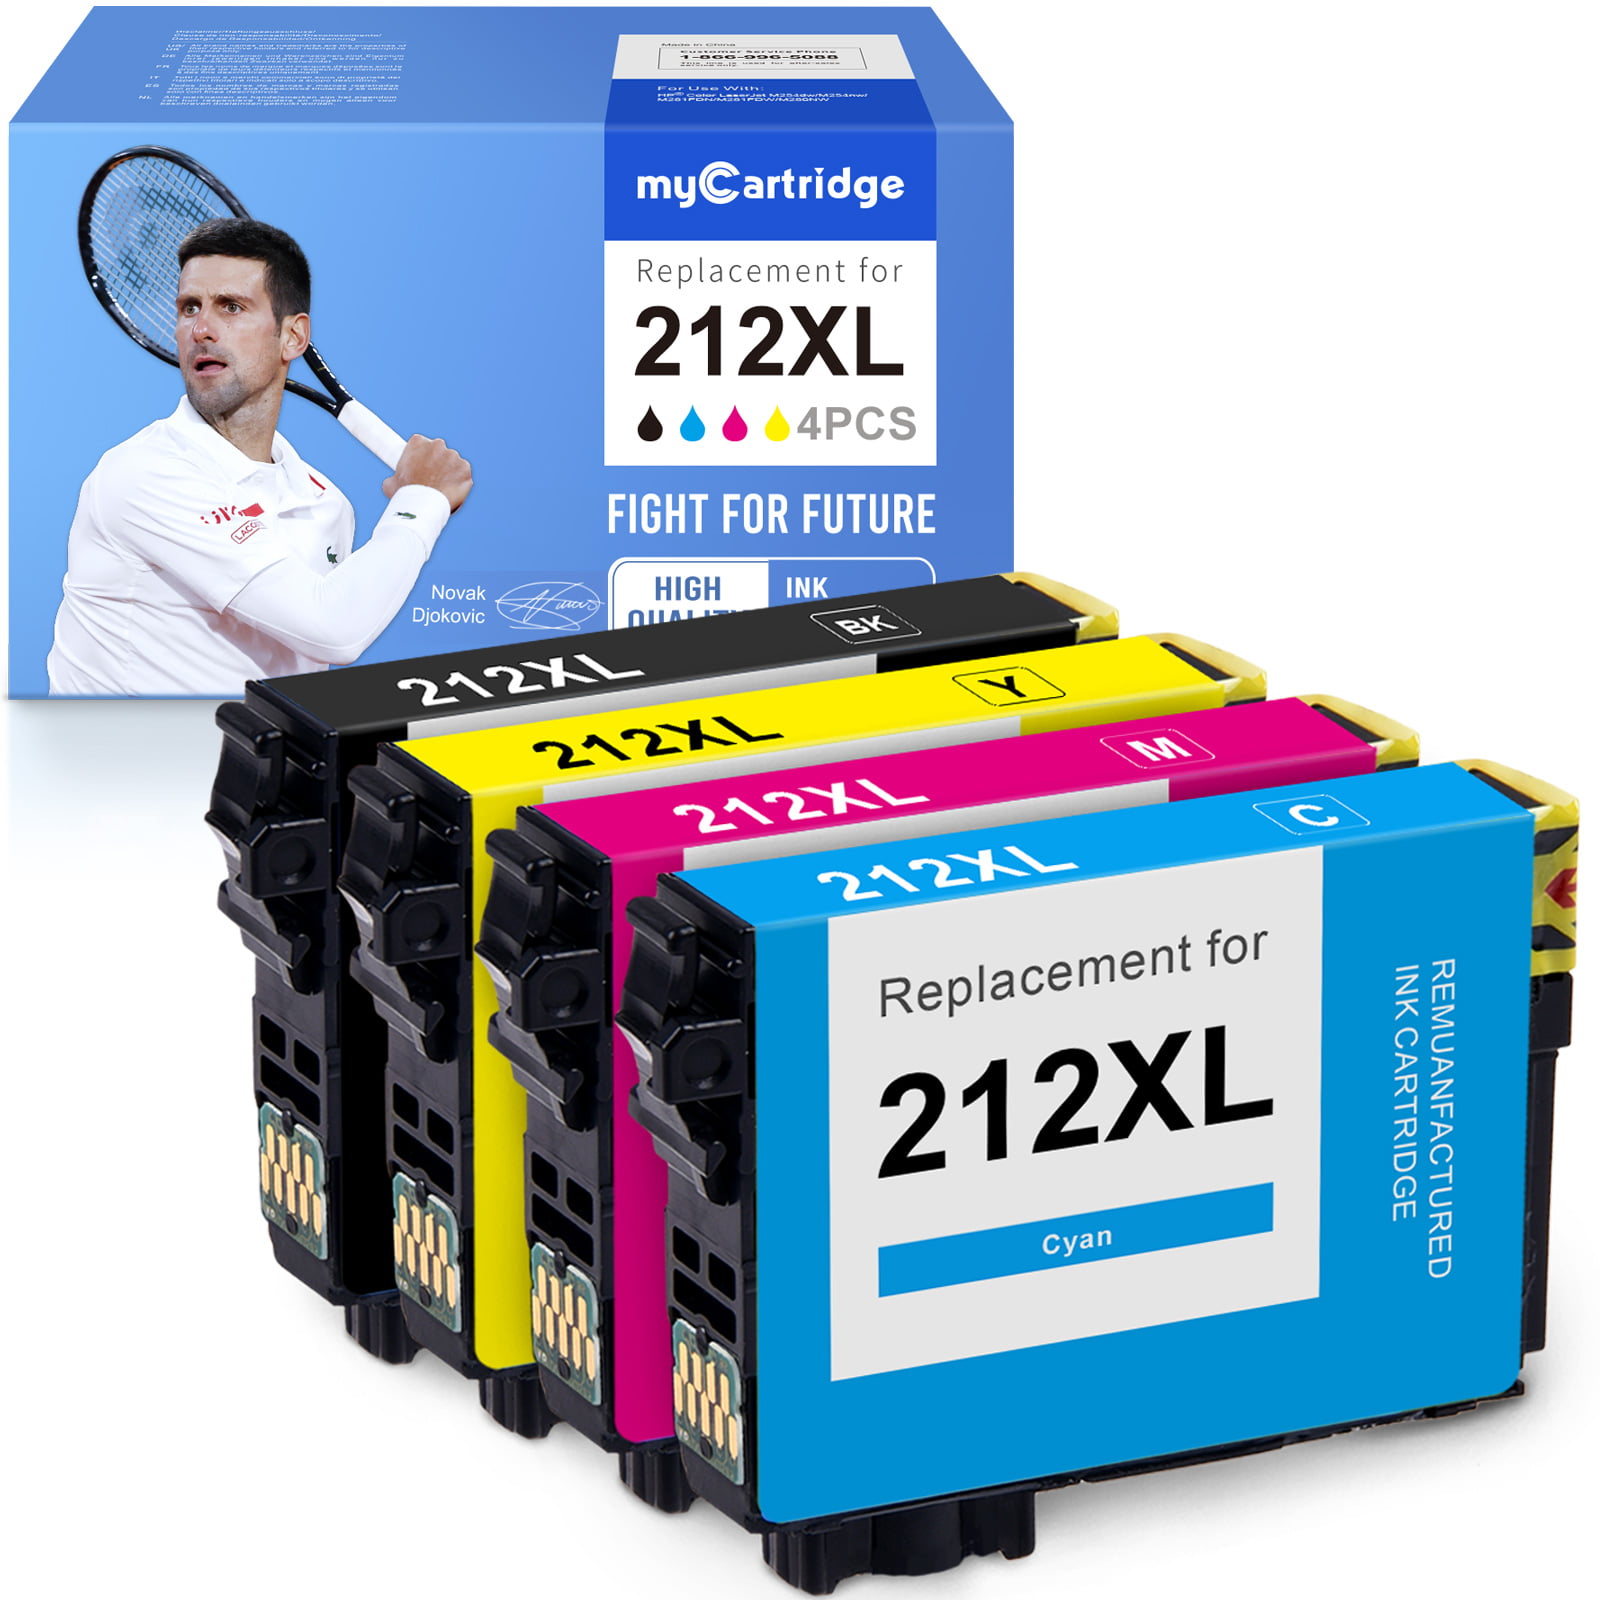 2 Packs Black Upgraded Work with XP-4100 XP-4105 WF-2830 WF-2850 Printer St@r ink Remanufactured Ink Cartridge Replacement for Epson 212XL 212 XL 